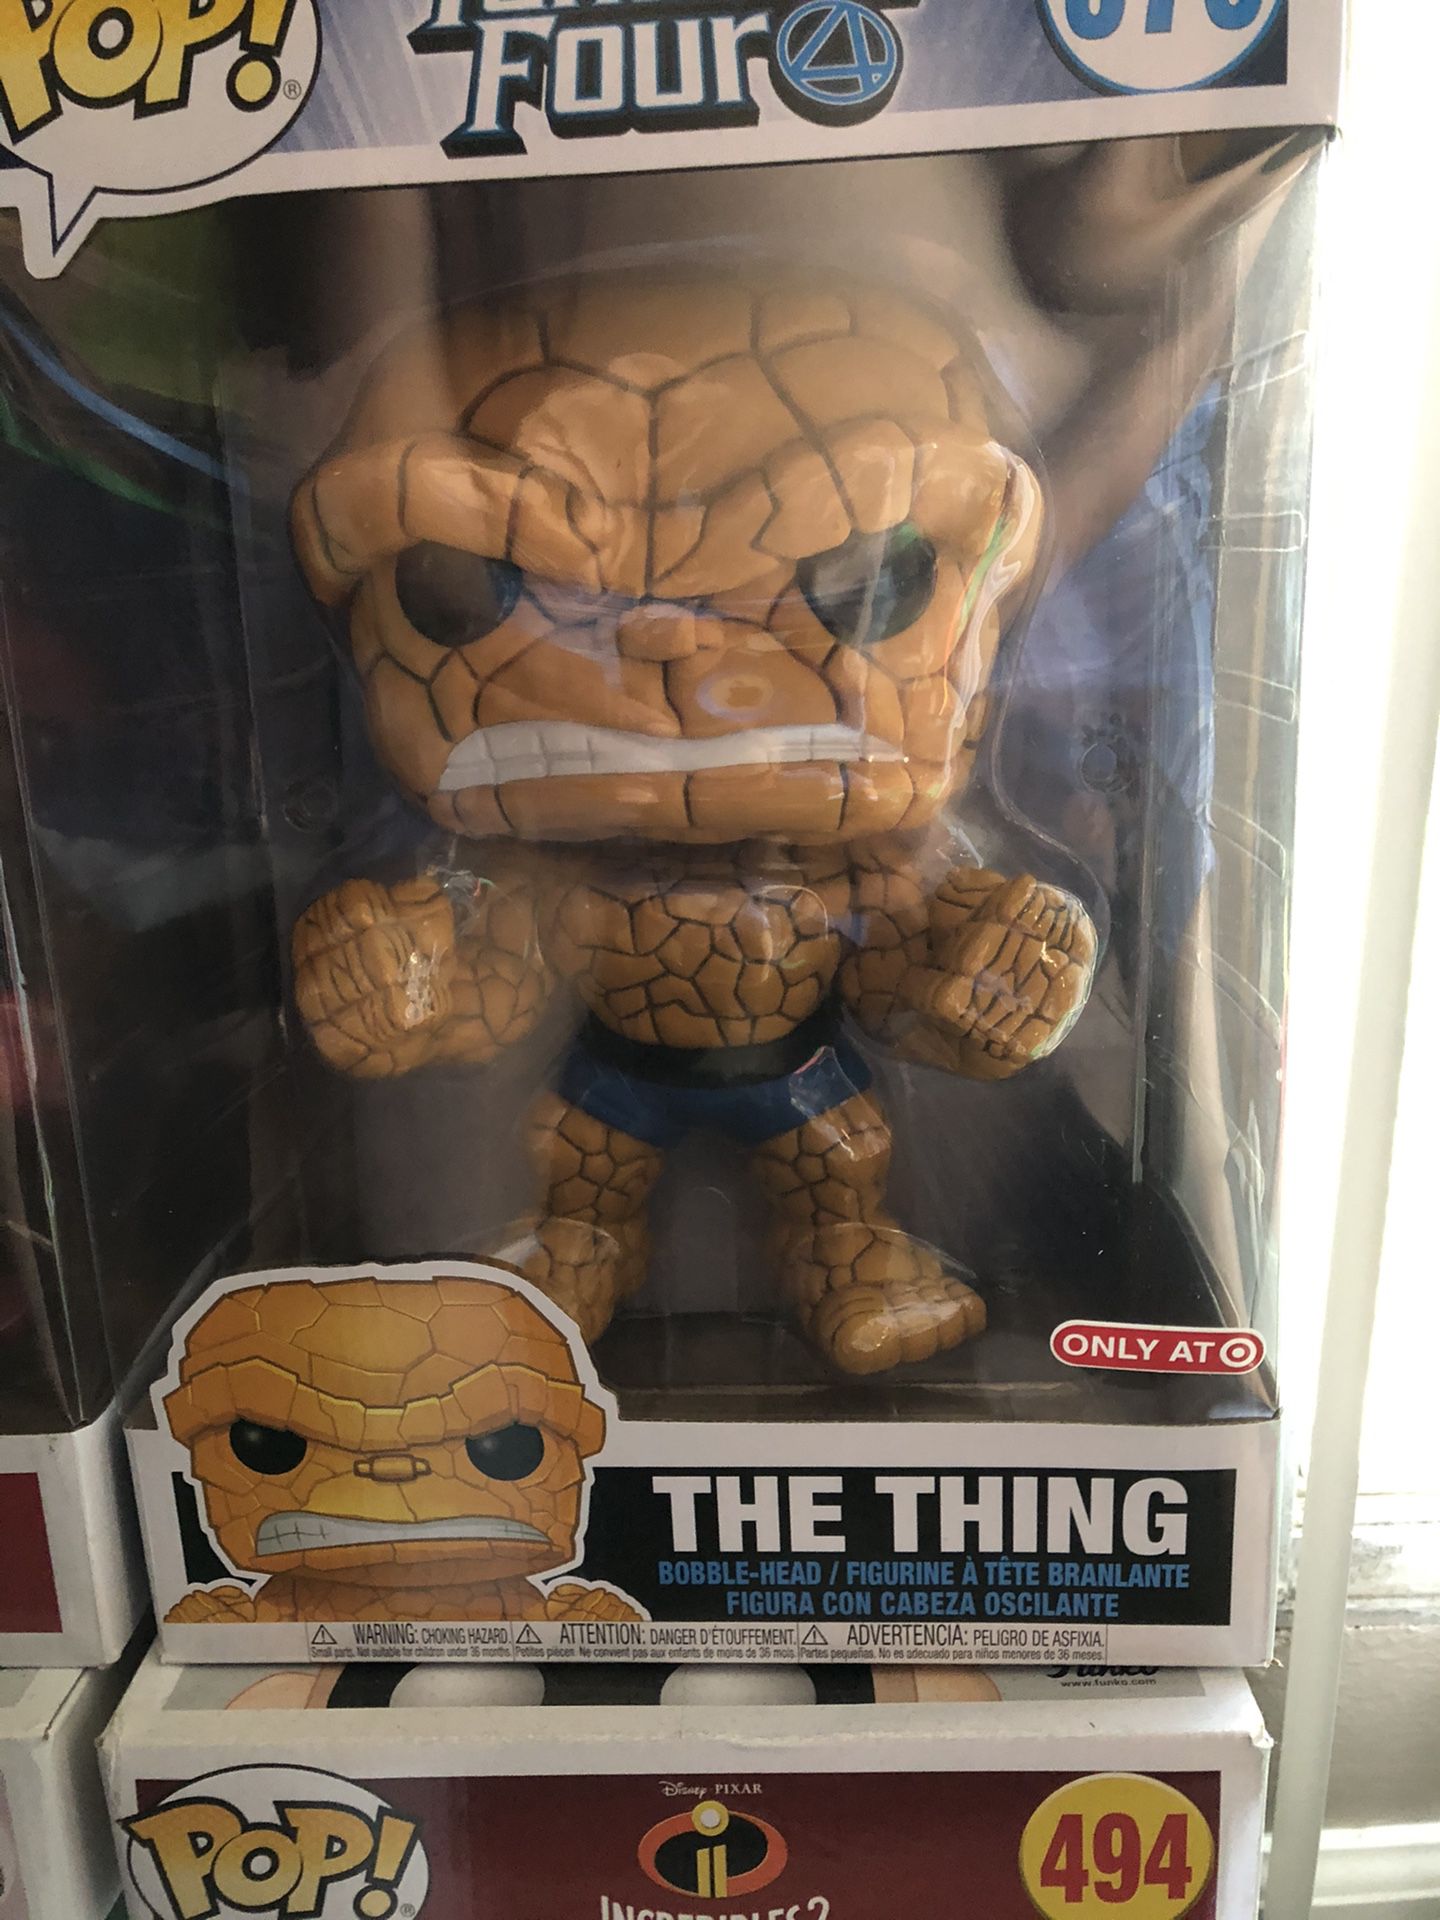 The thing 10”